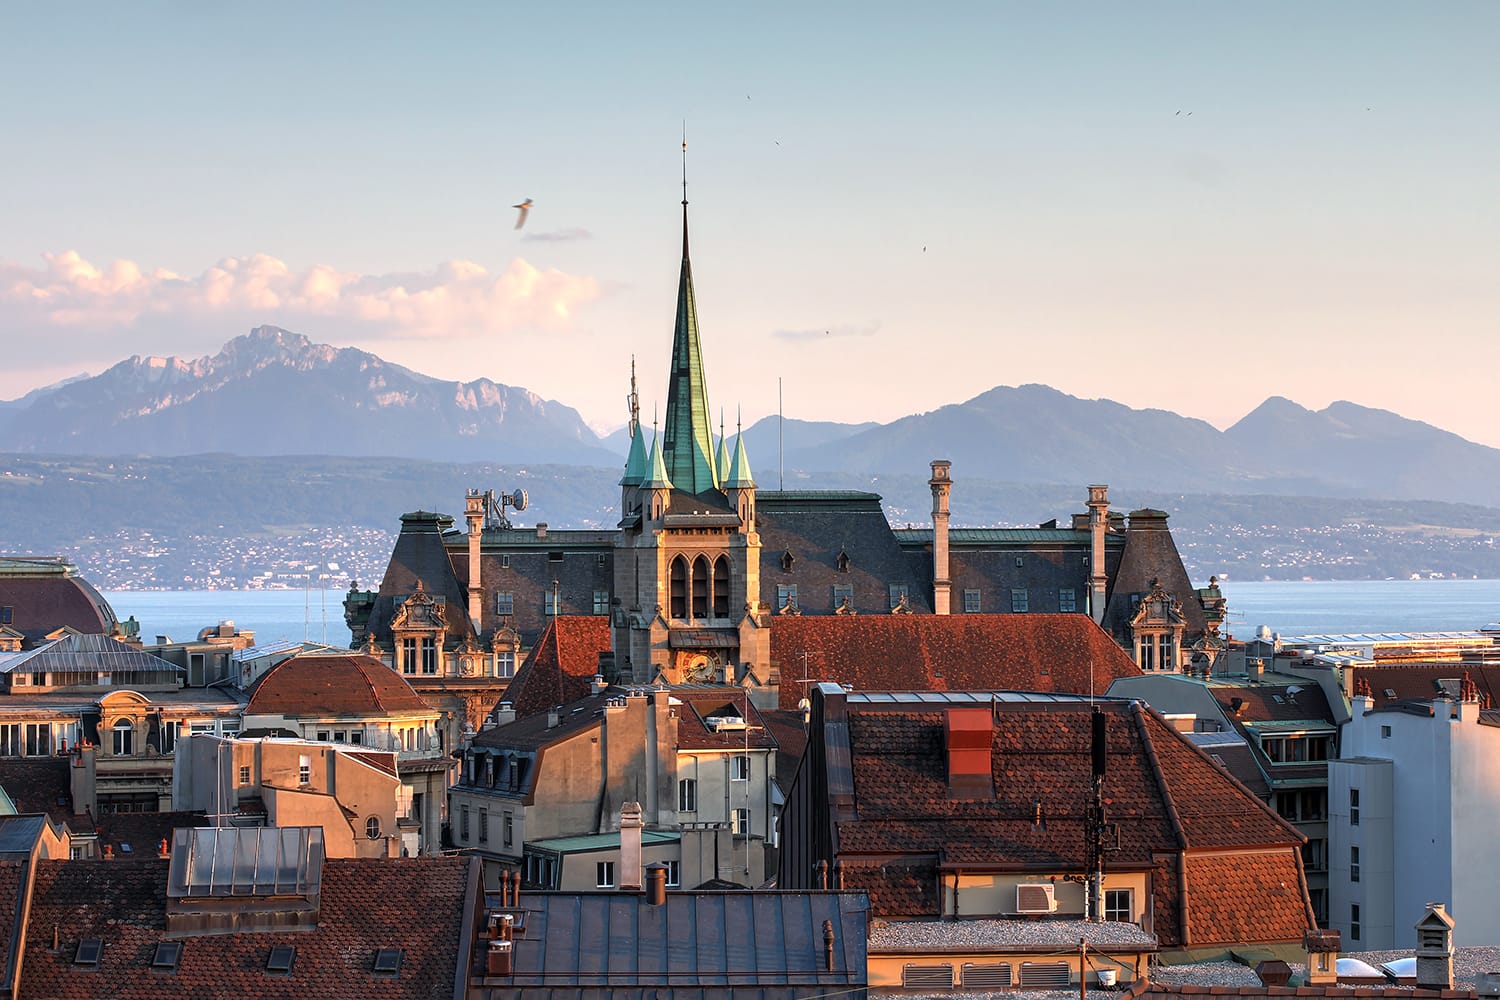 Skyline of Lausanne, Switzerland as seen from the Cathedral hill at sunset zoomed-in on the tower of St-Francois Church.